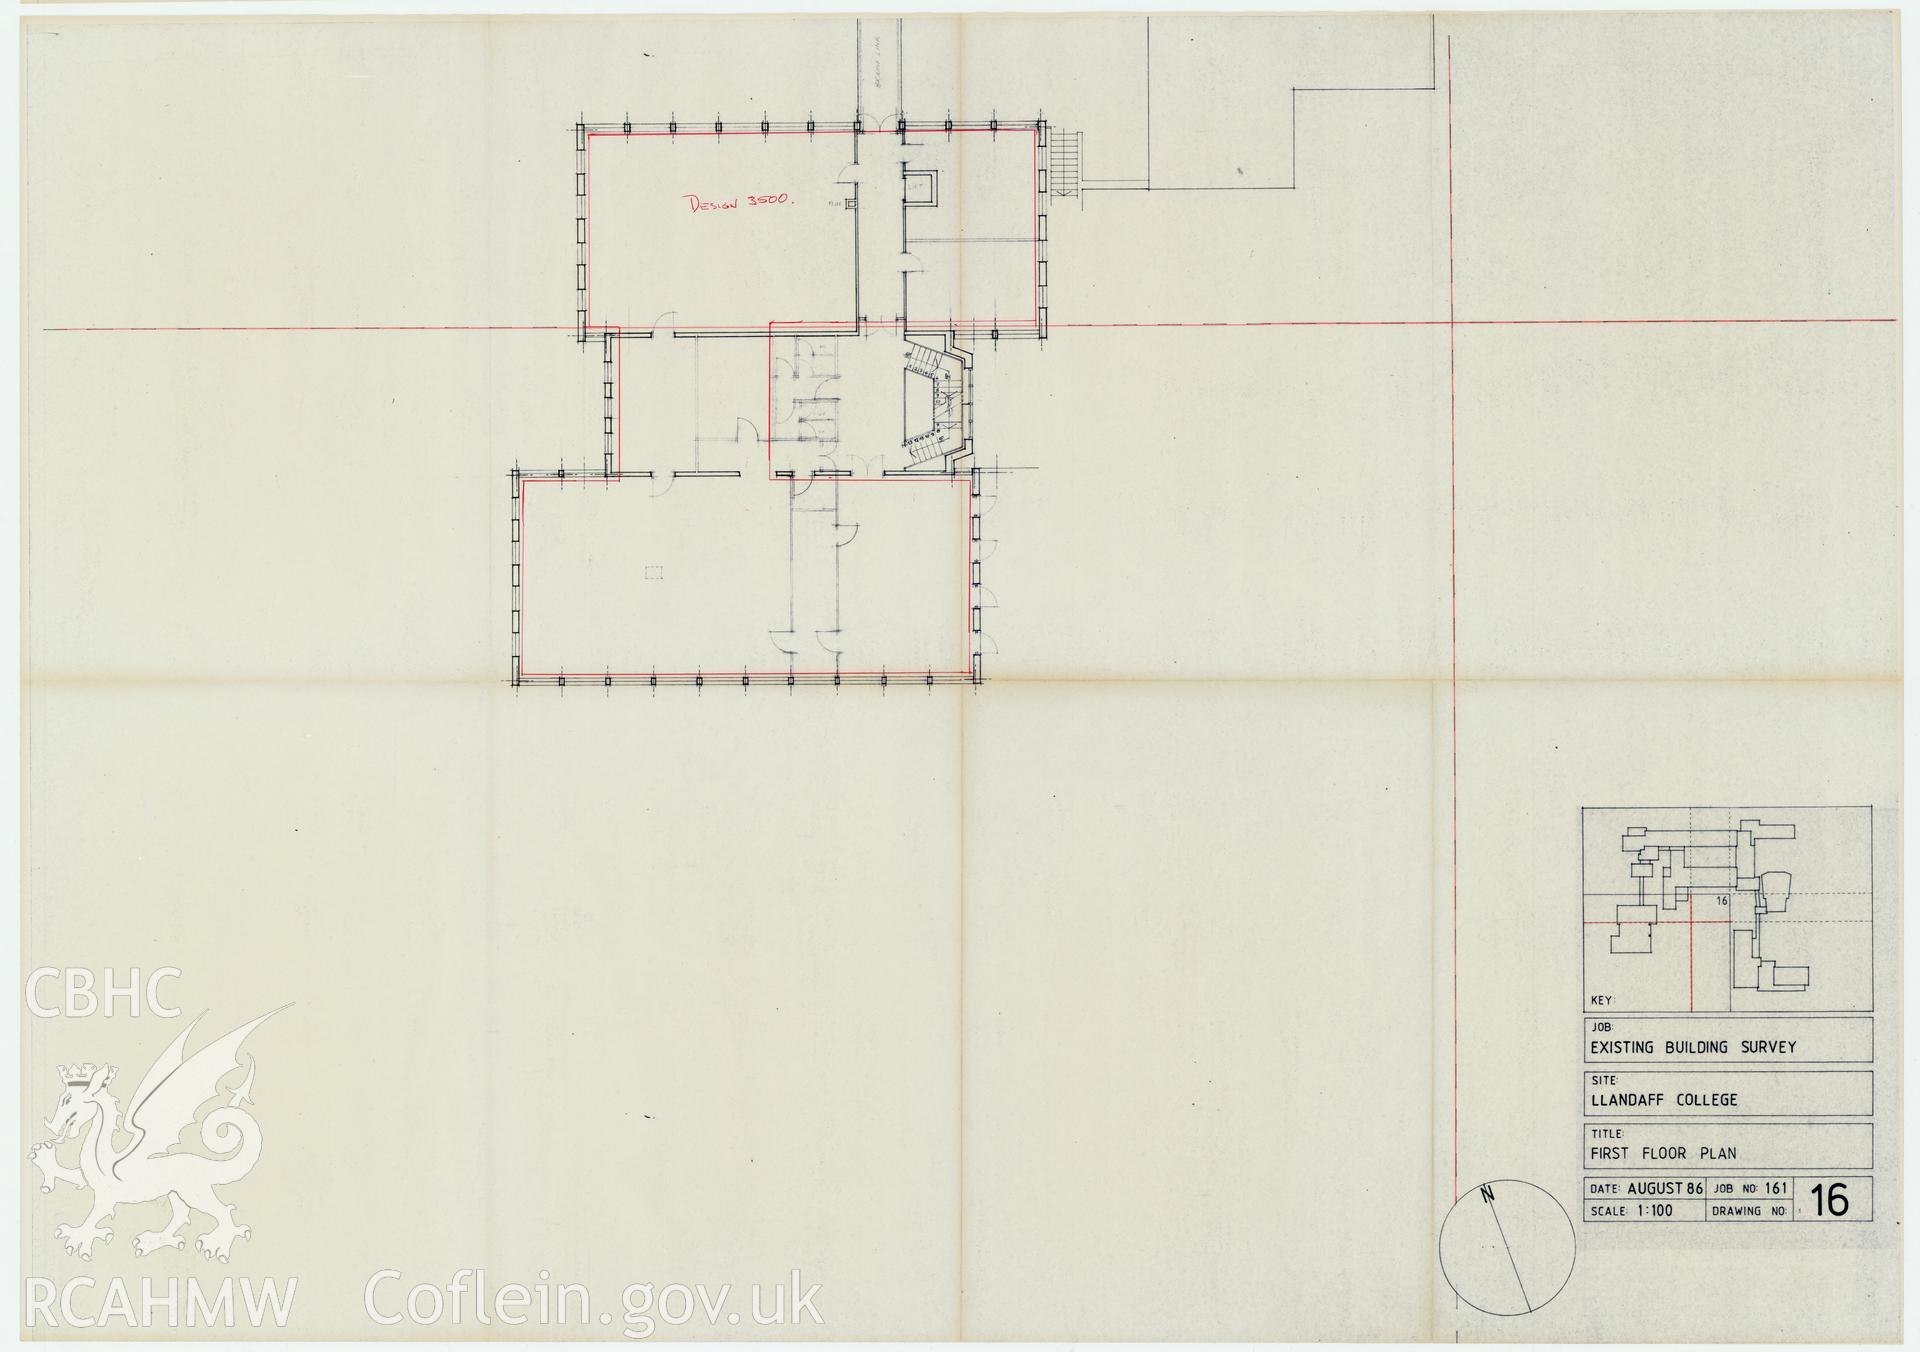 Plan of the first floor of Llandaff College, Cardiff. The existing building survey, August 1986, No 16.